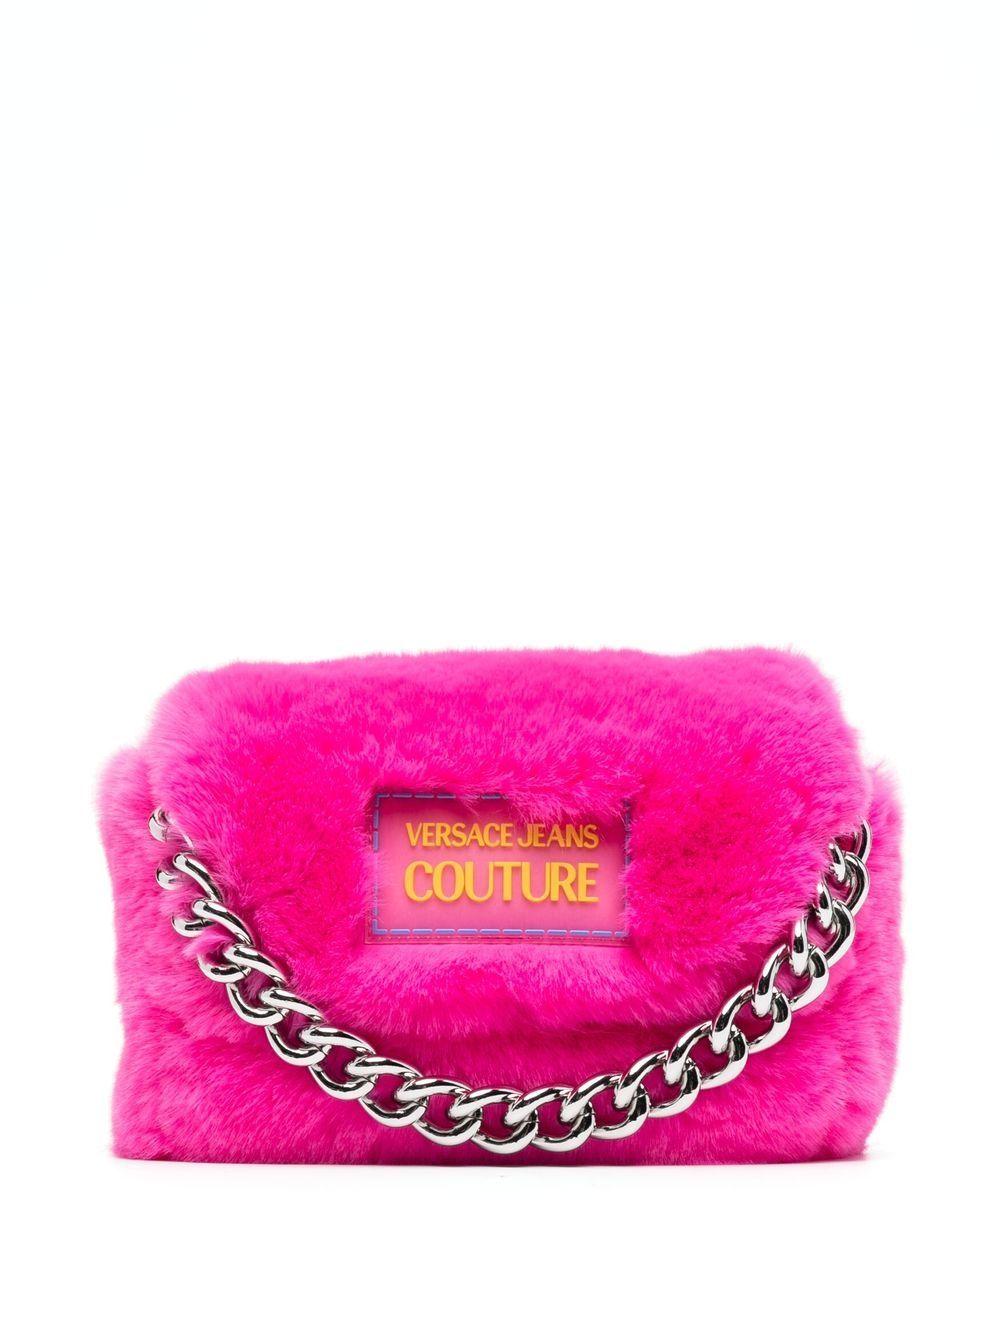 Versace Jeans Couture Faux-fur Shoulder Bag in Pink | Lyst